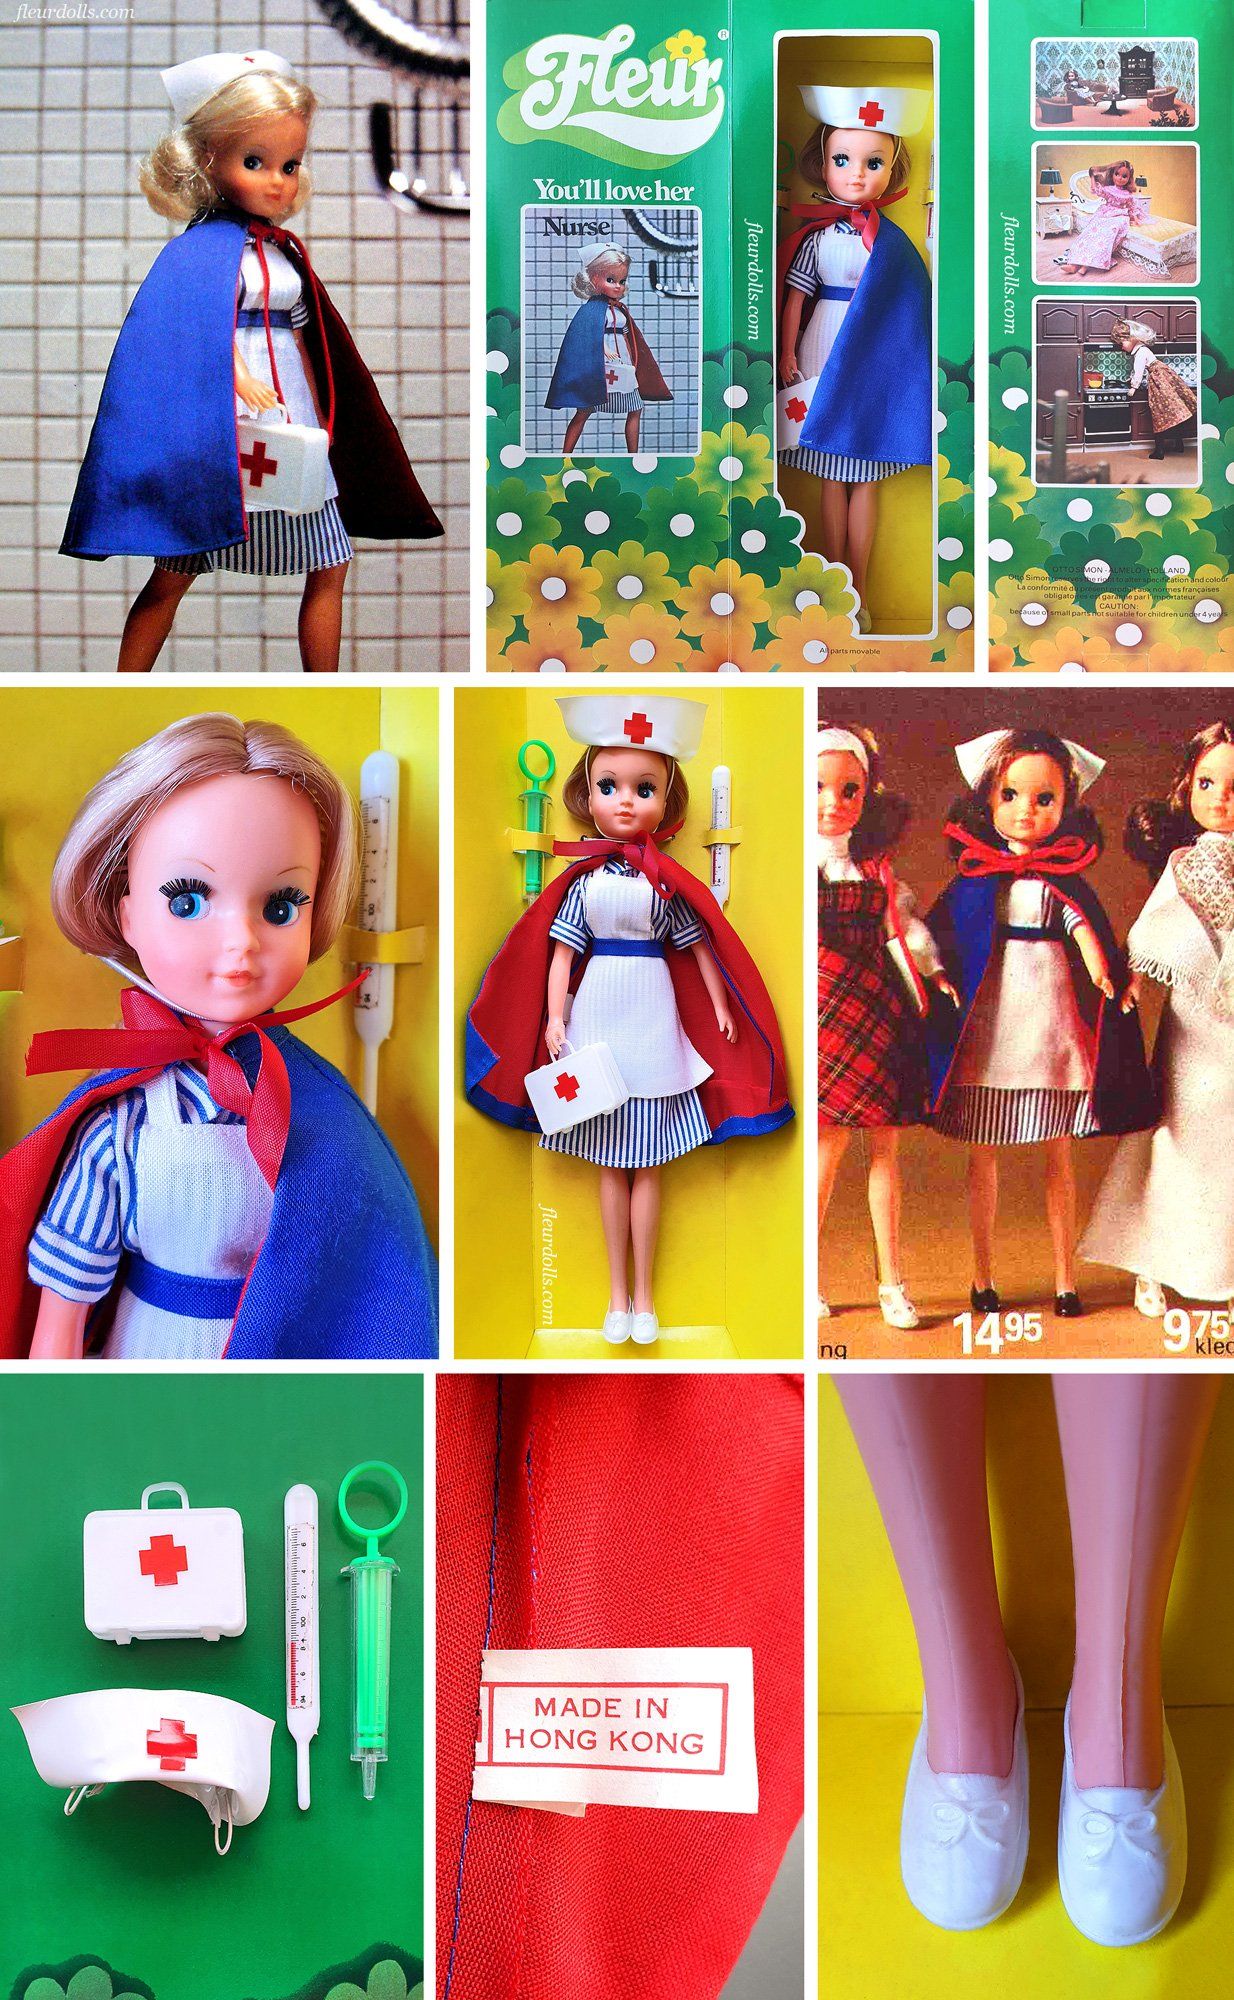 Nurse Fleur doll by Dutch company Otto Simon from the 1970s  with accessories